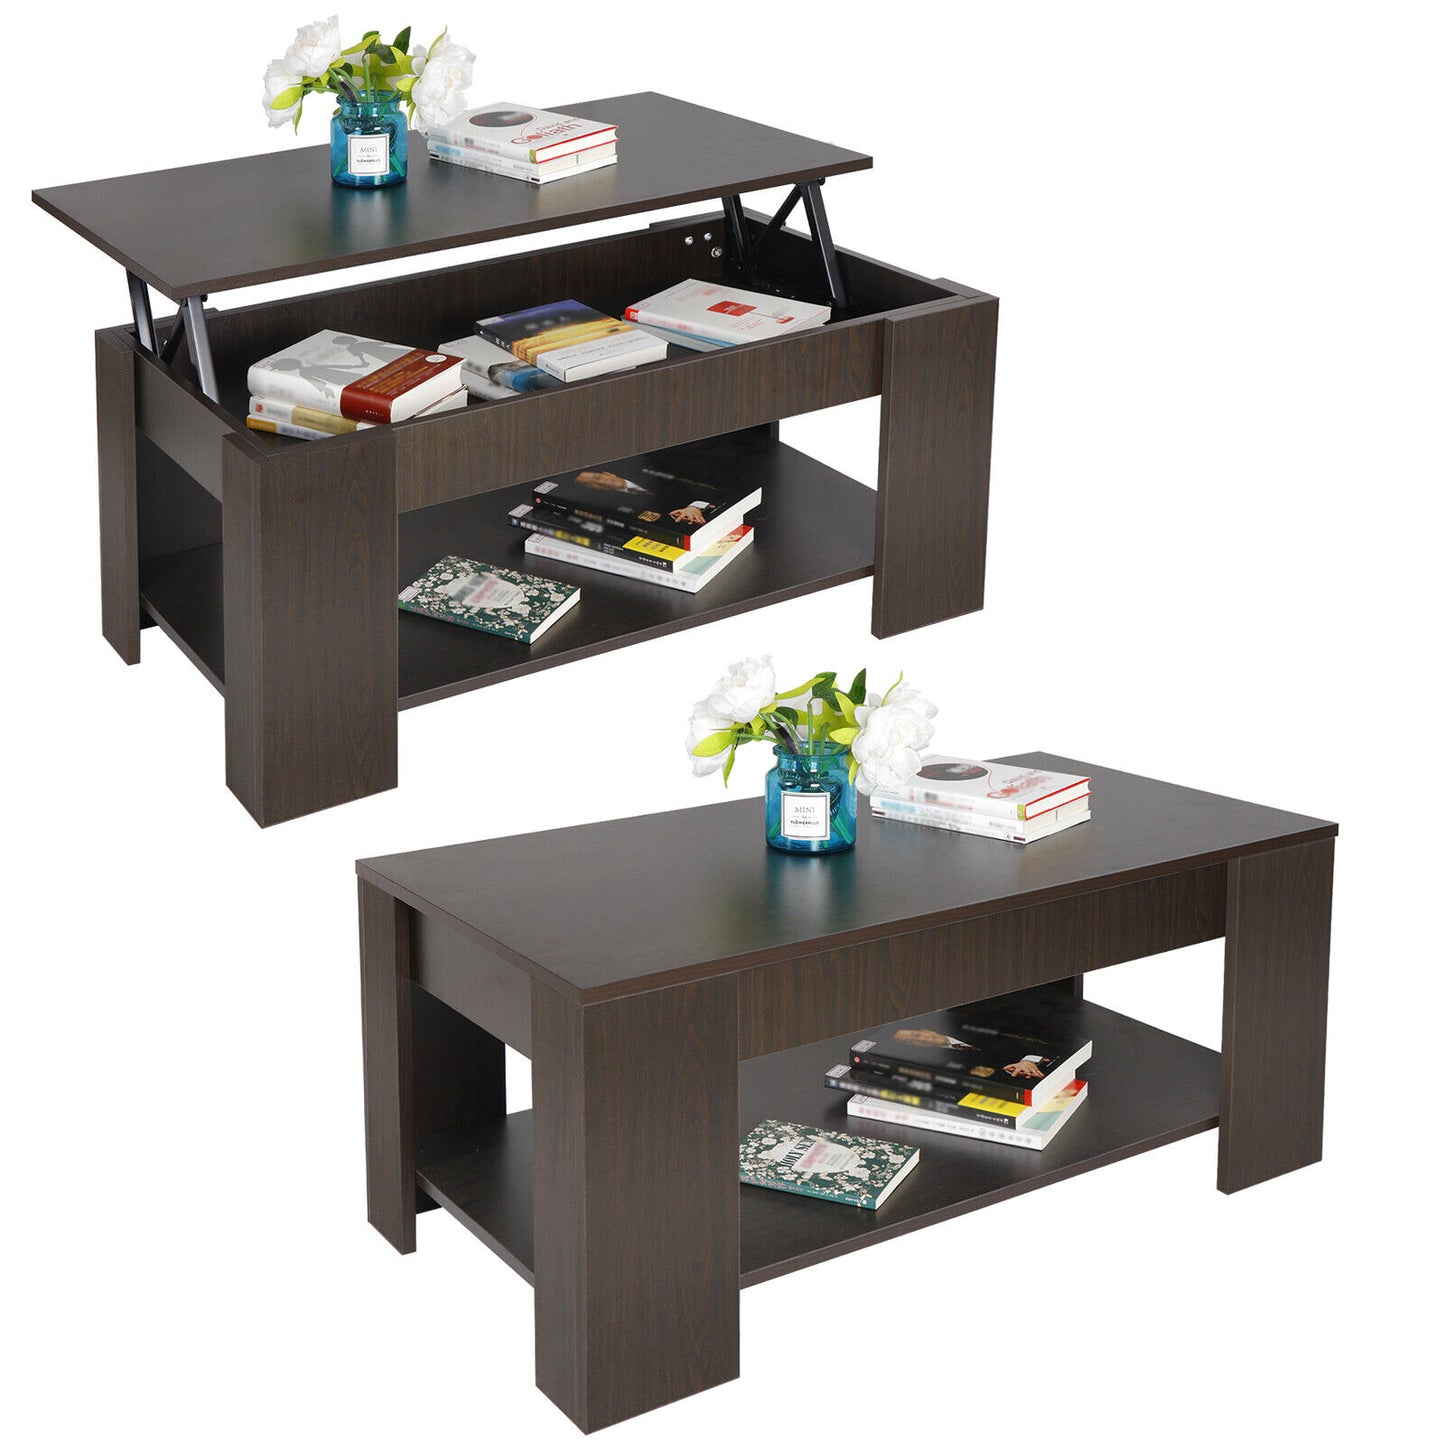 Multifunctional Coffee Table Lift-up Top Hidden Storage Compartment Lower Shelf